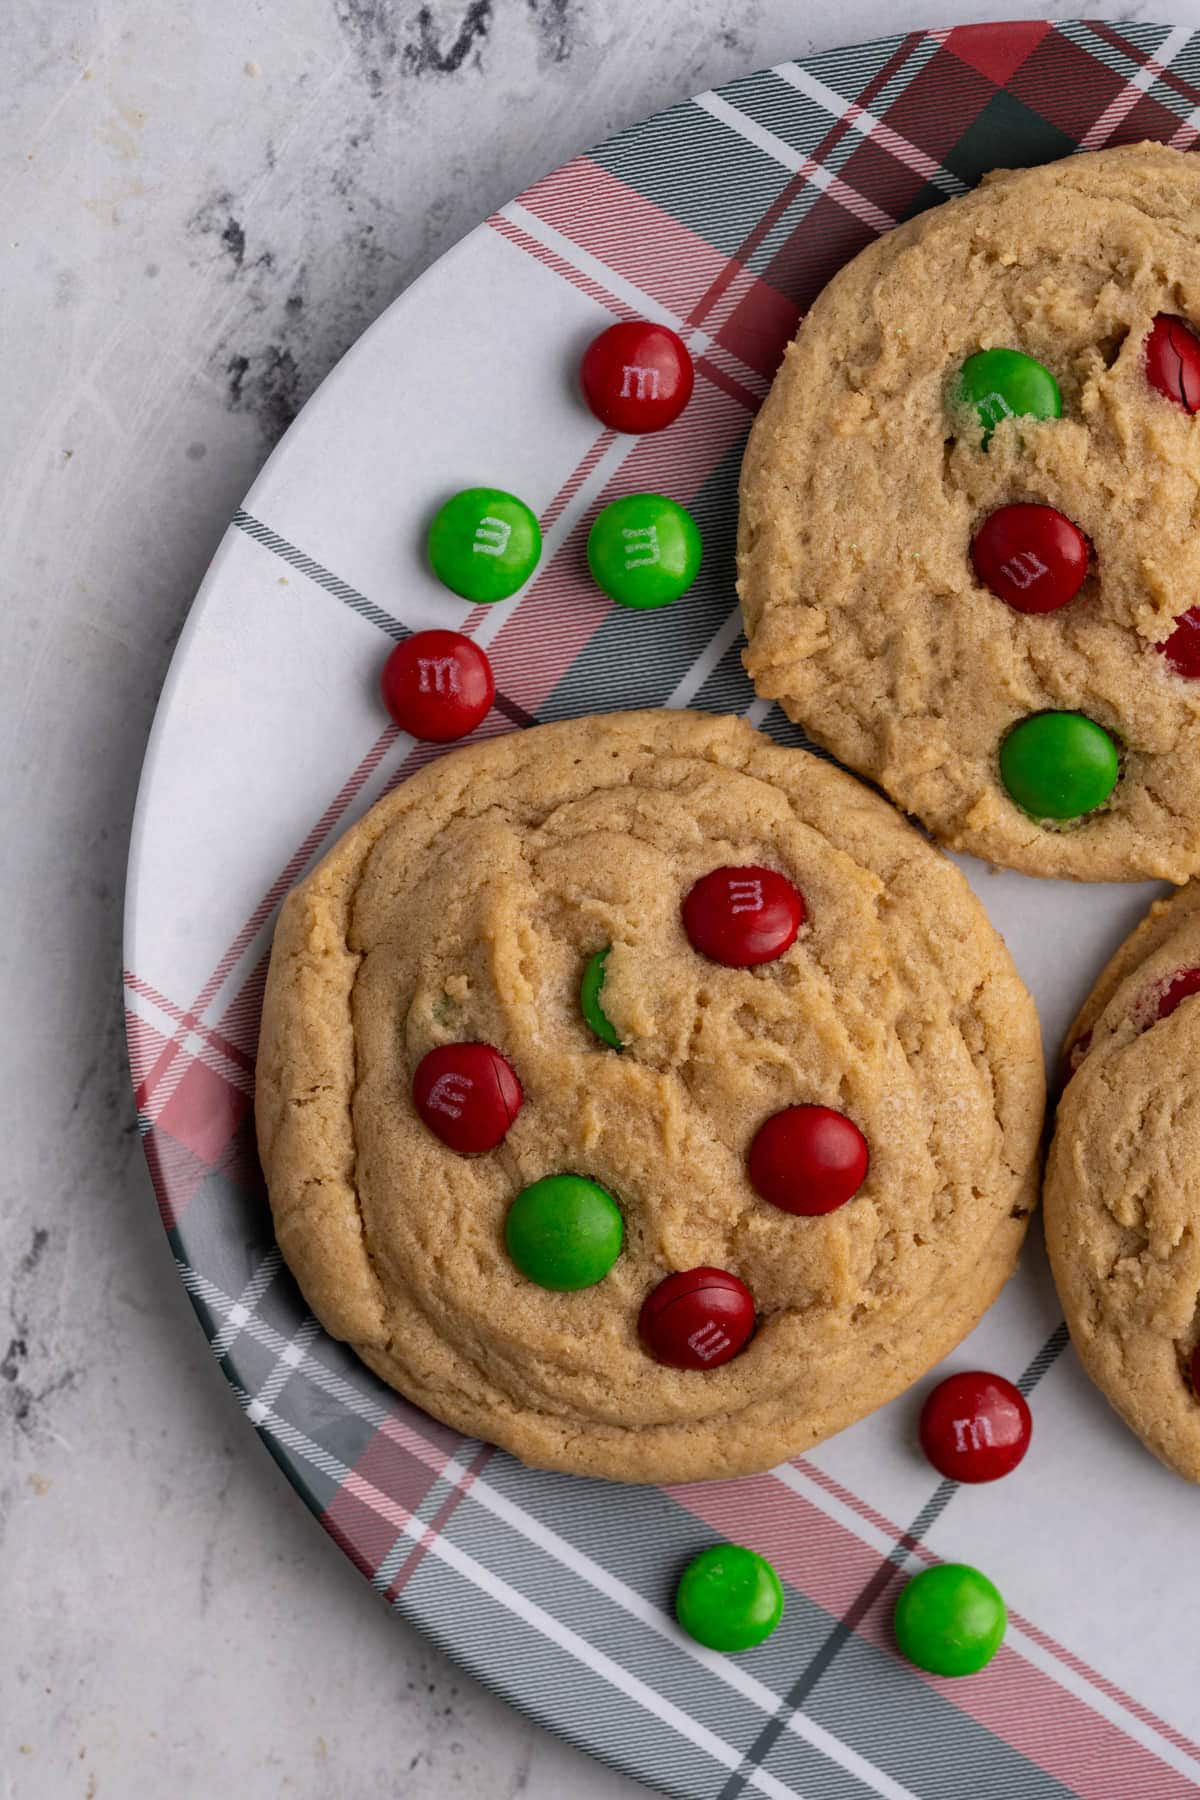 Overhead image of Christmas cookies on a red and green plate surrounded by M&M's.